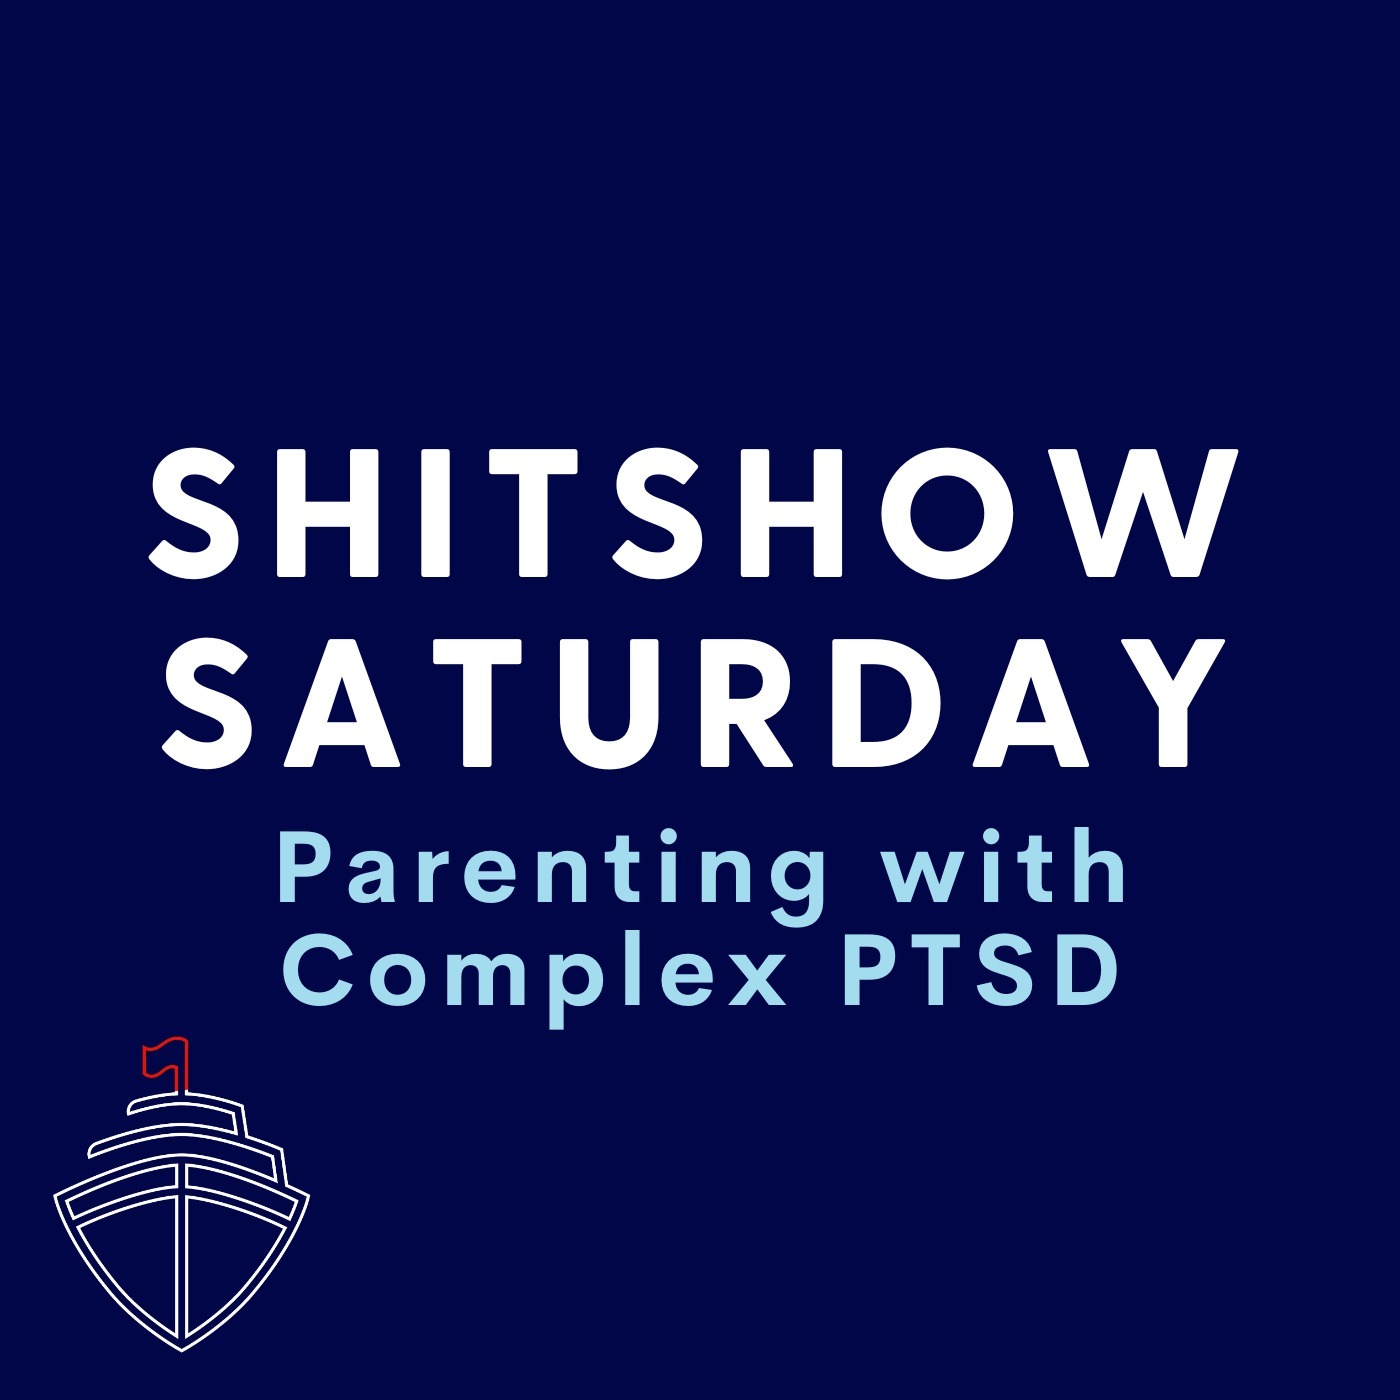 SHITSHOW SATURDAY #102 - Parenting with Complex PTSD